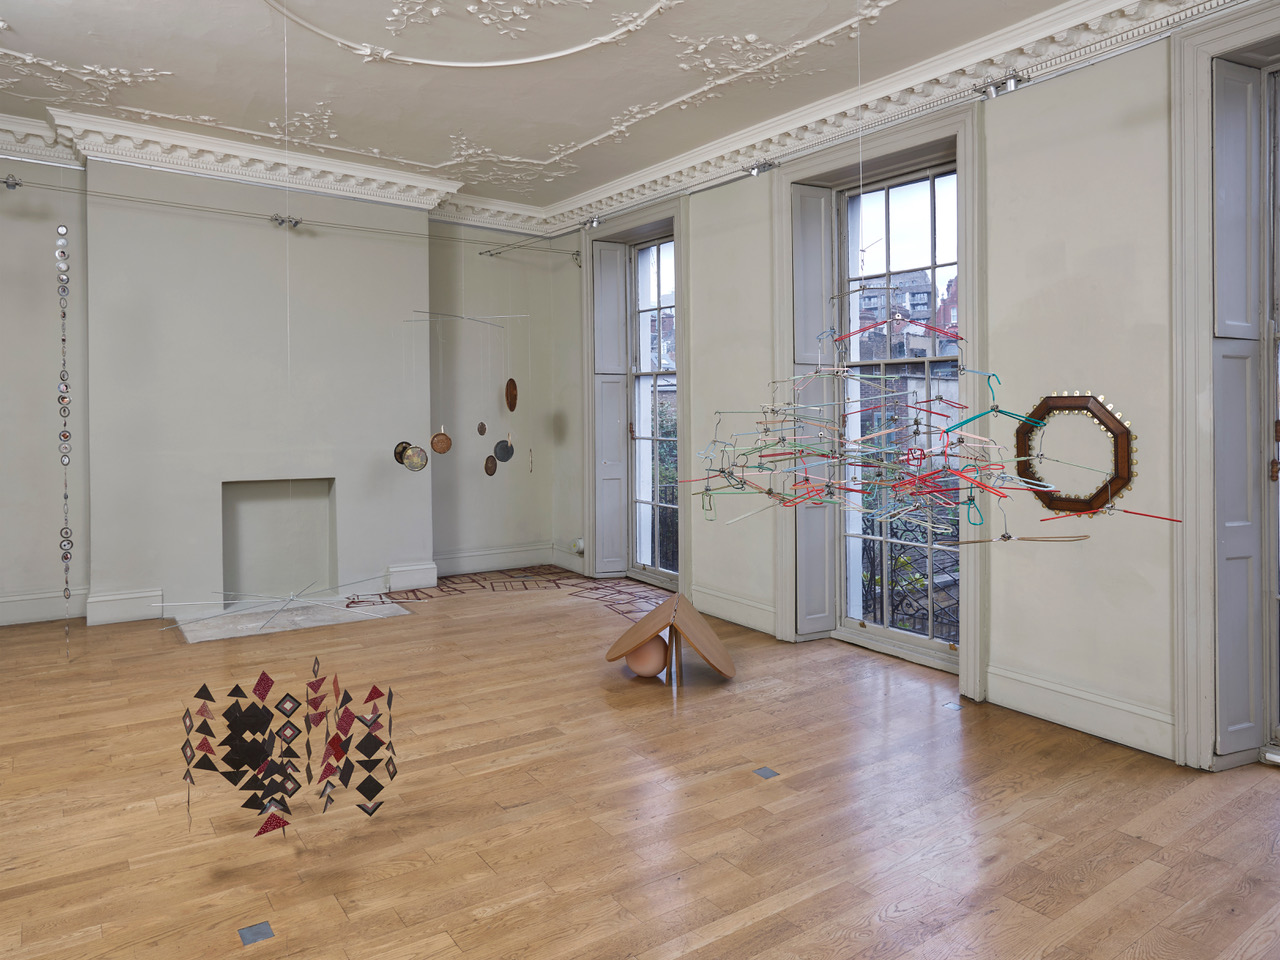 Nicky Hirst 'The Electorate' installation photography by Andy Keate